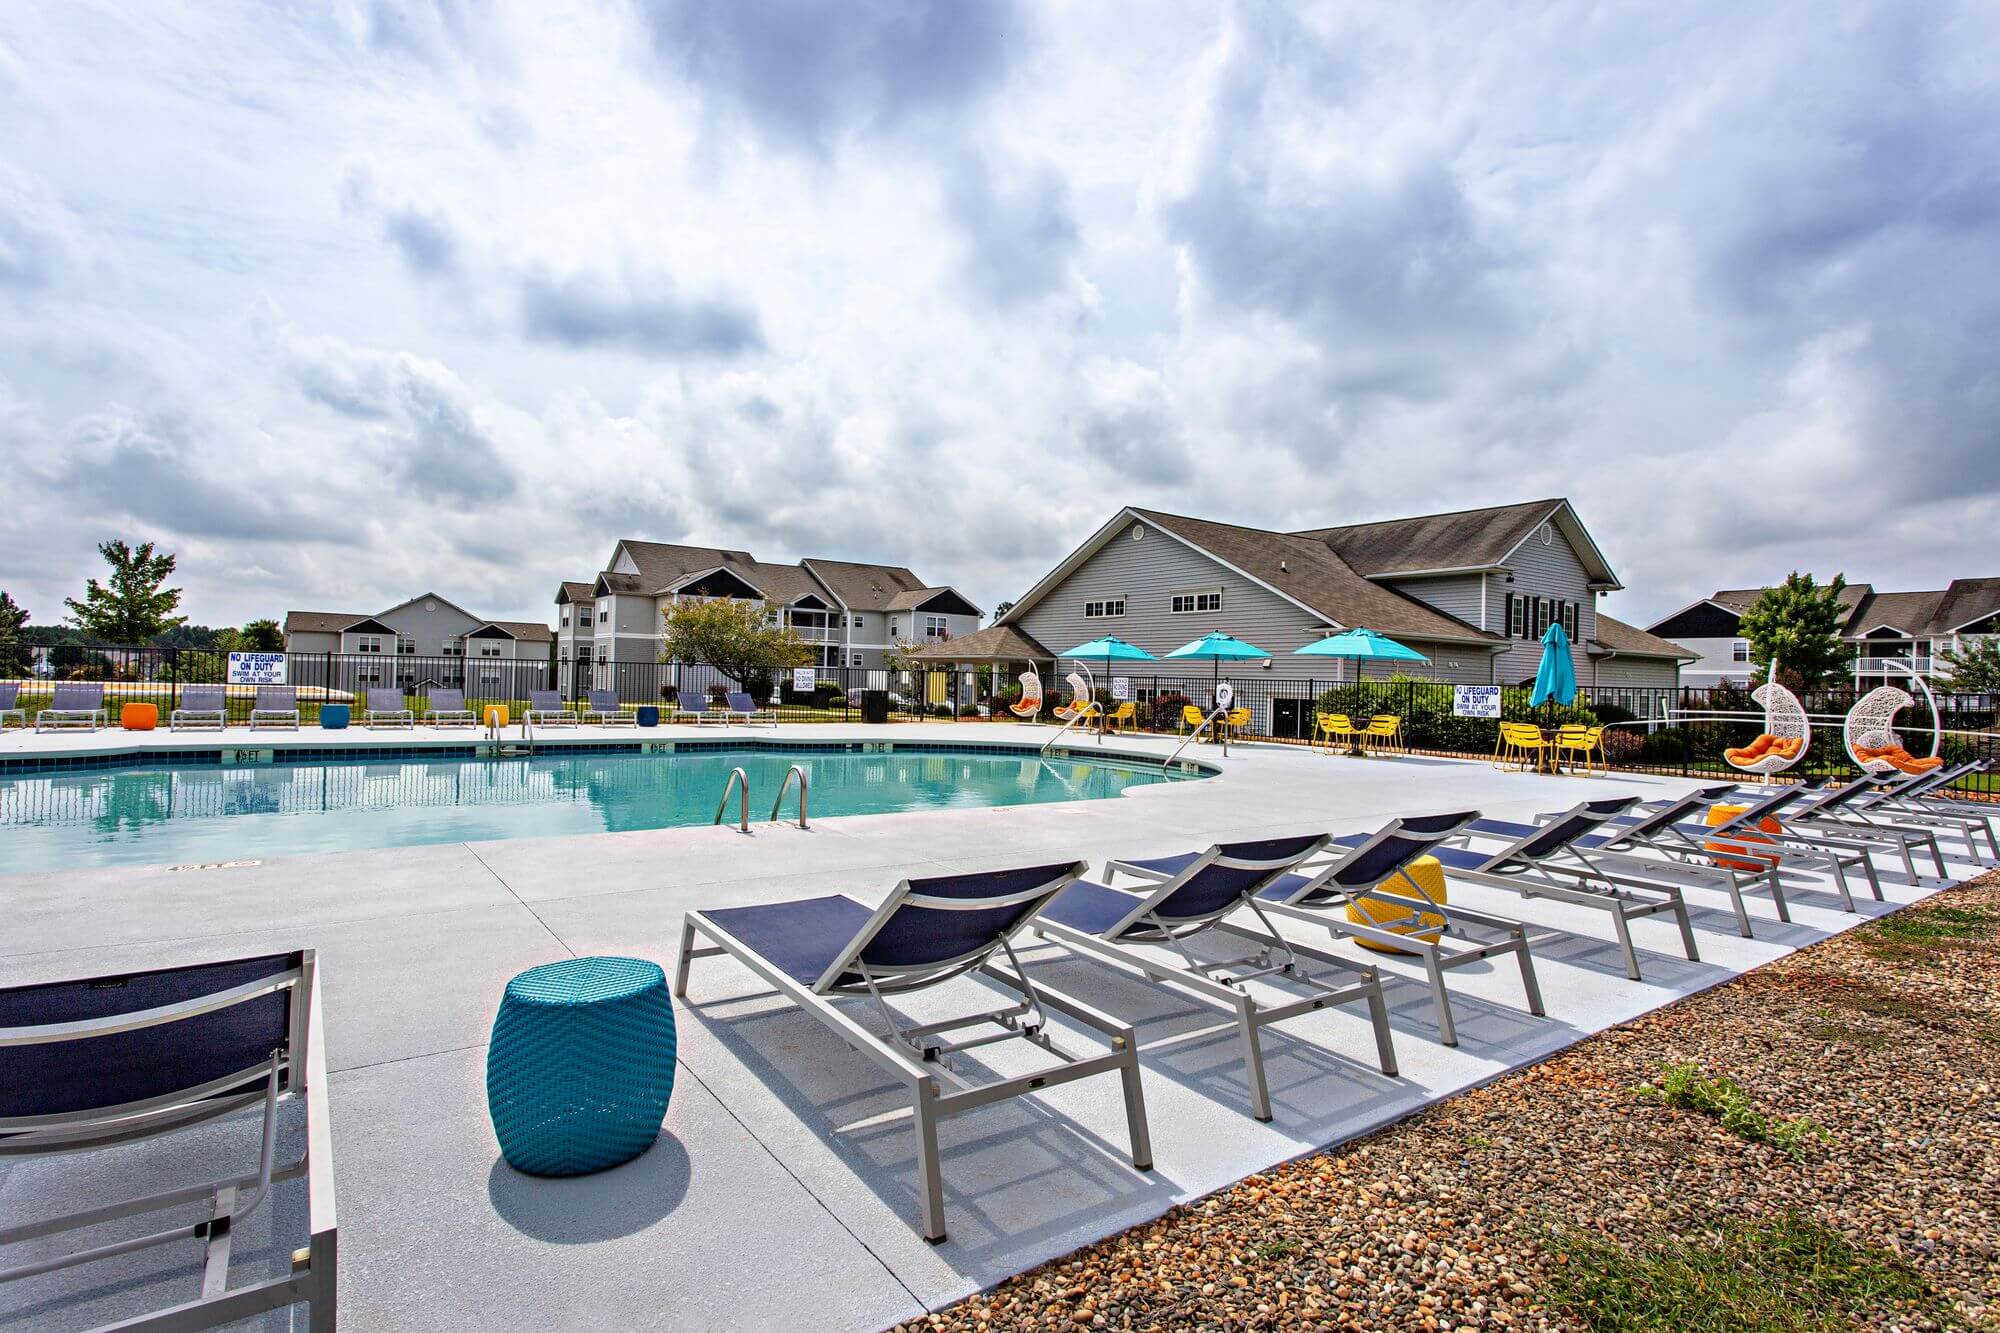 university village at clemson off campus apartments and townhomes near clemson university resort style pool with lounge areas